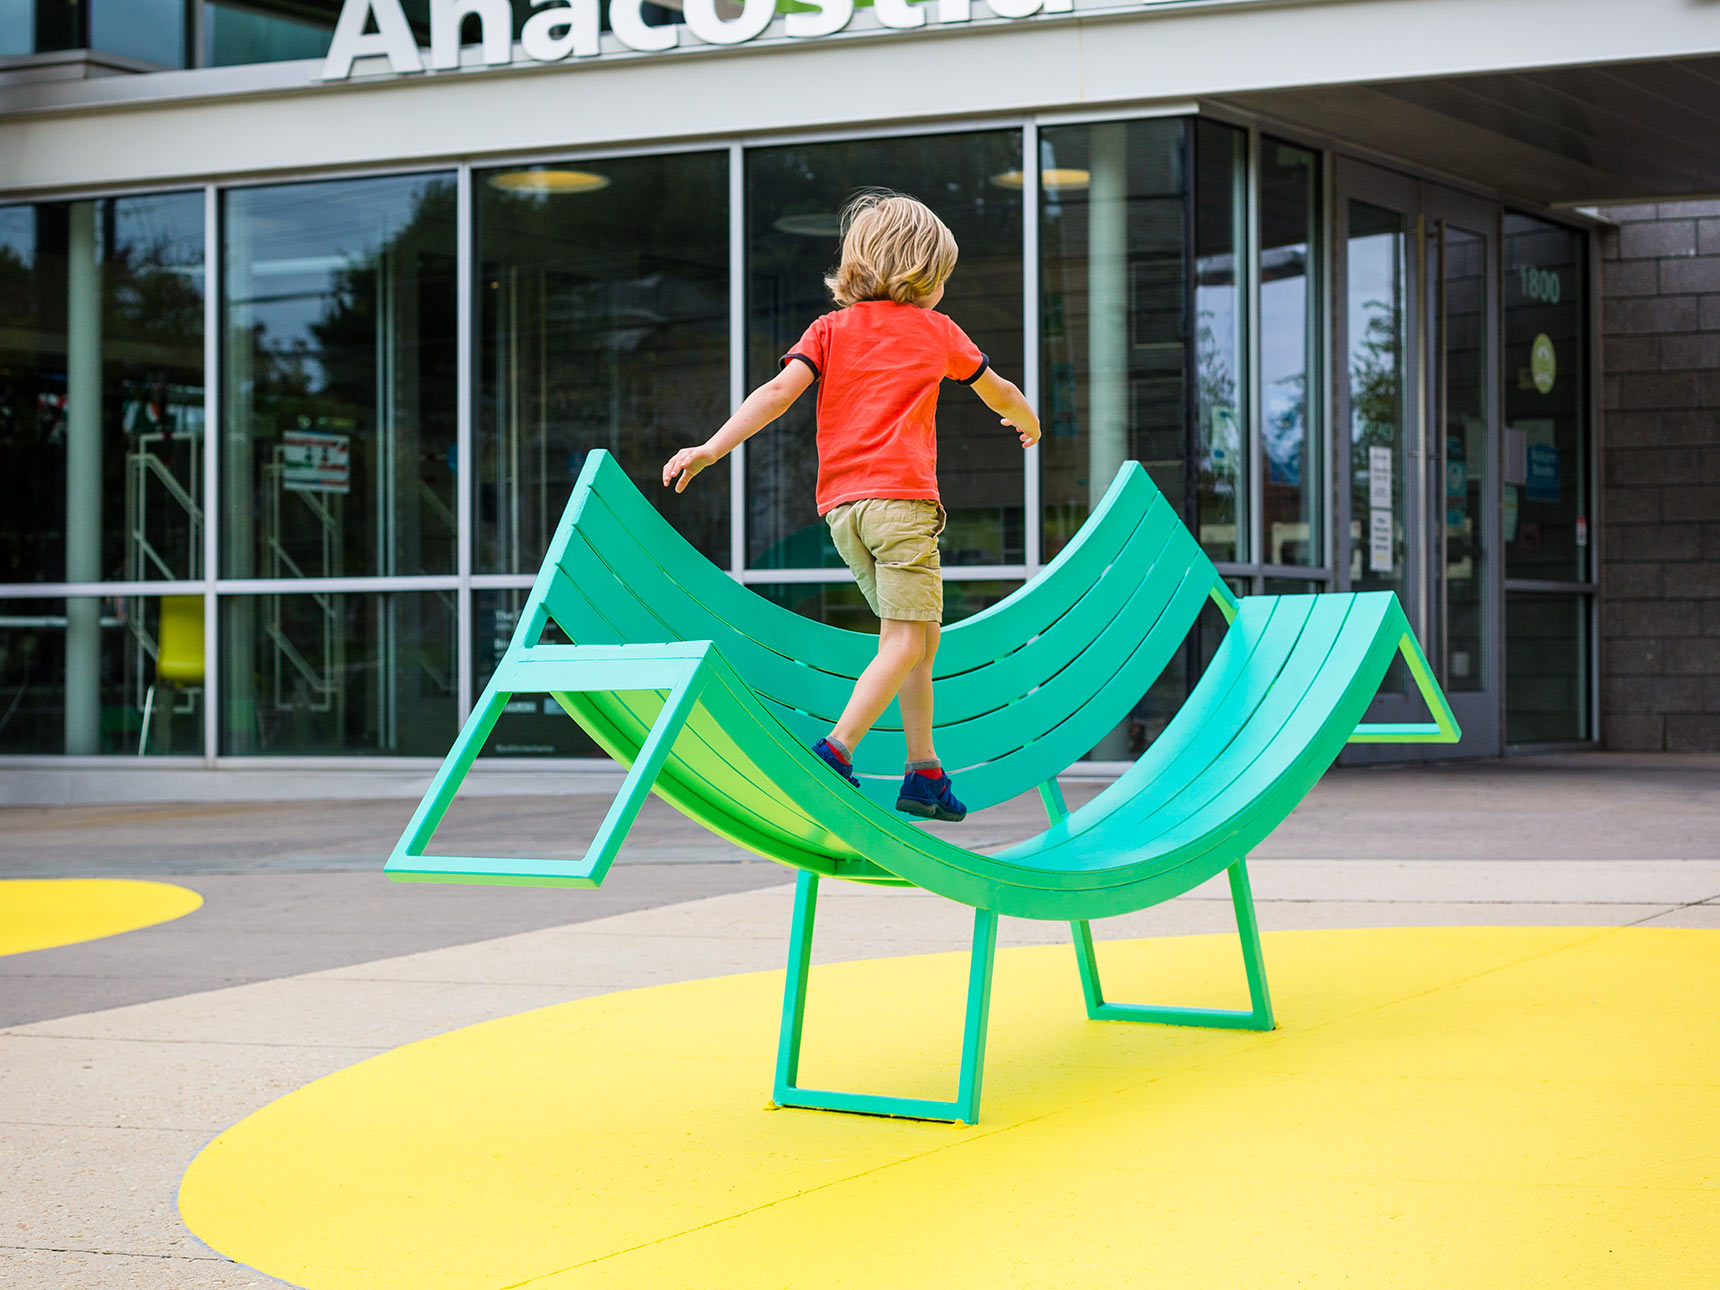 A boy plays on a curved sculptural bench, part of The Chairs, a sculptural seating public art installation in Washington DC.